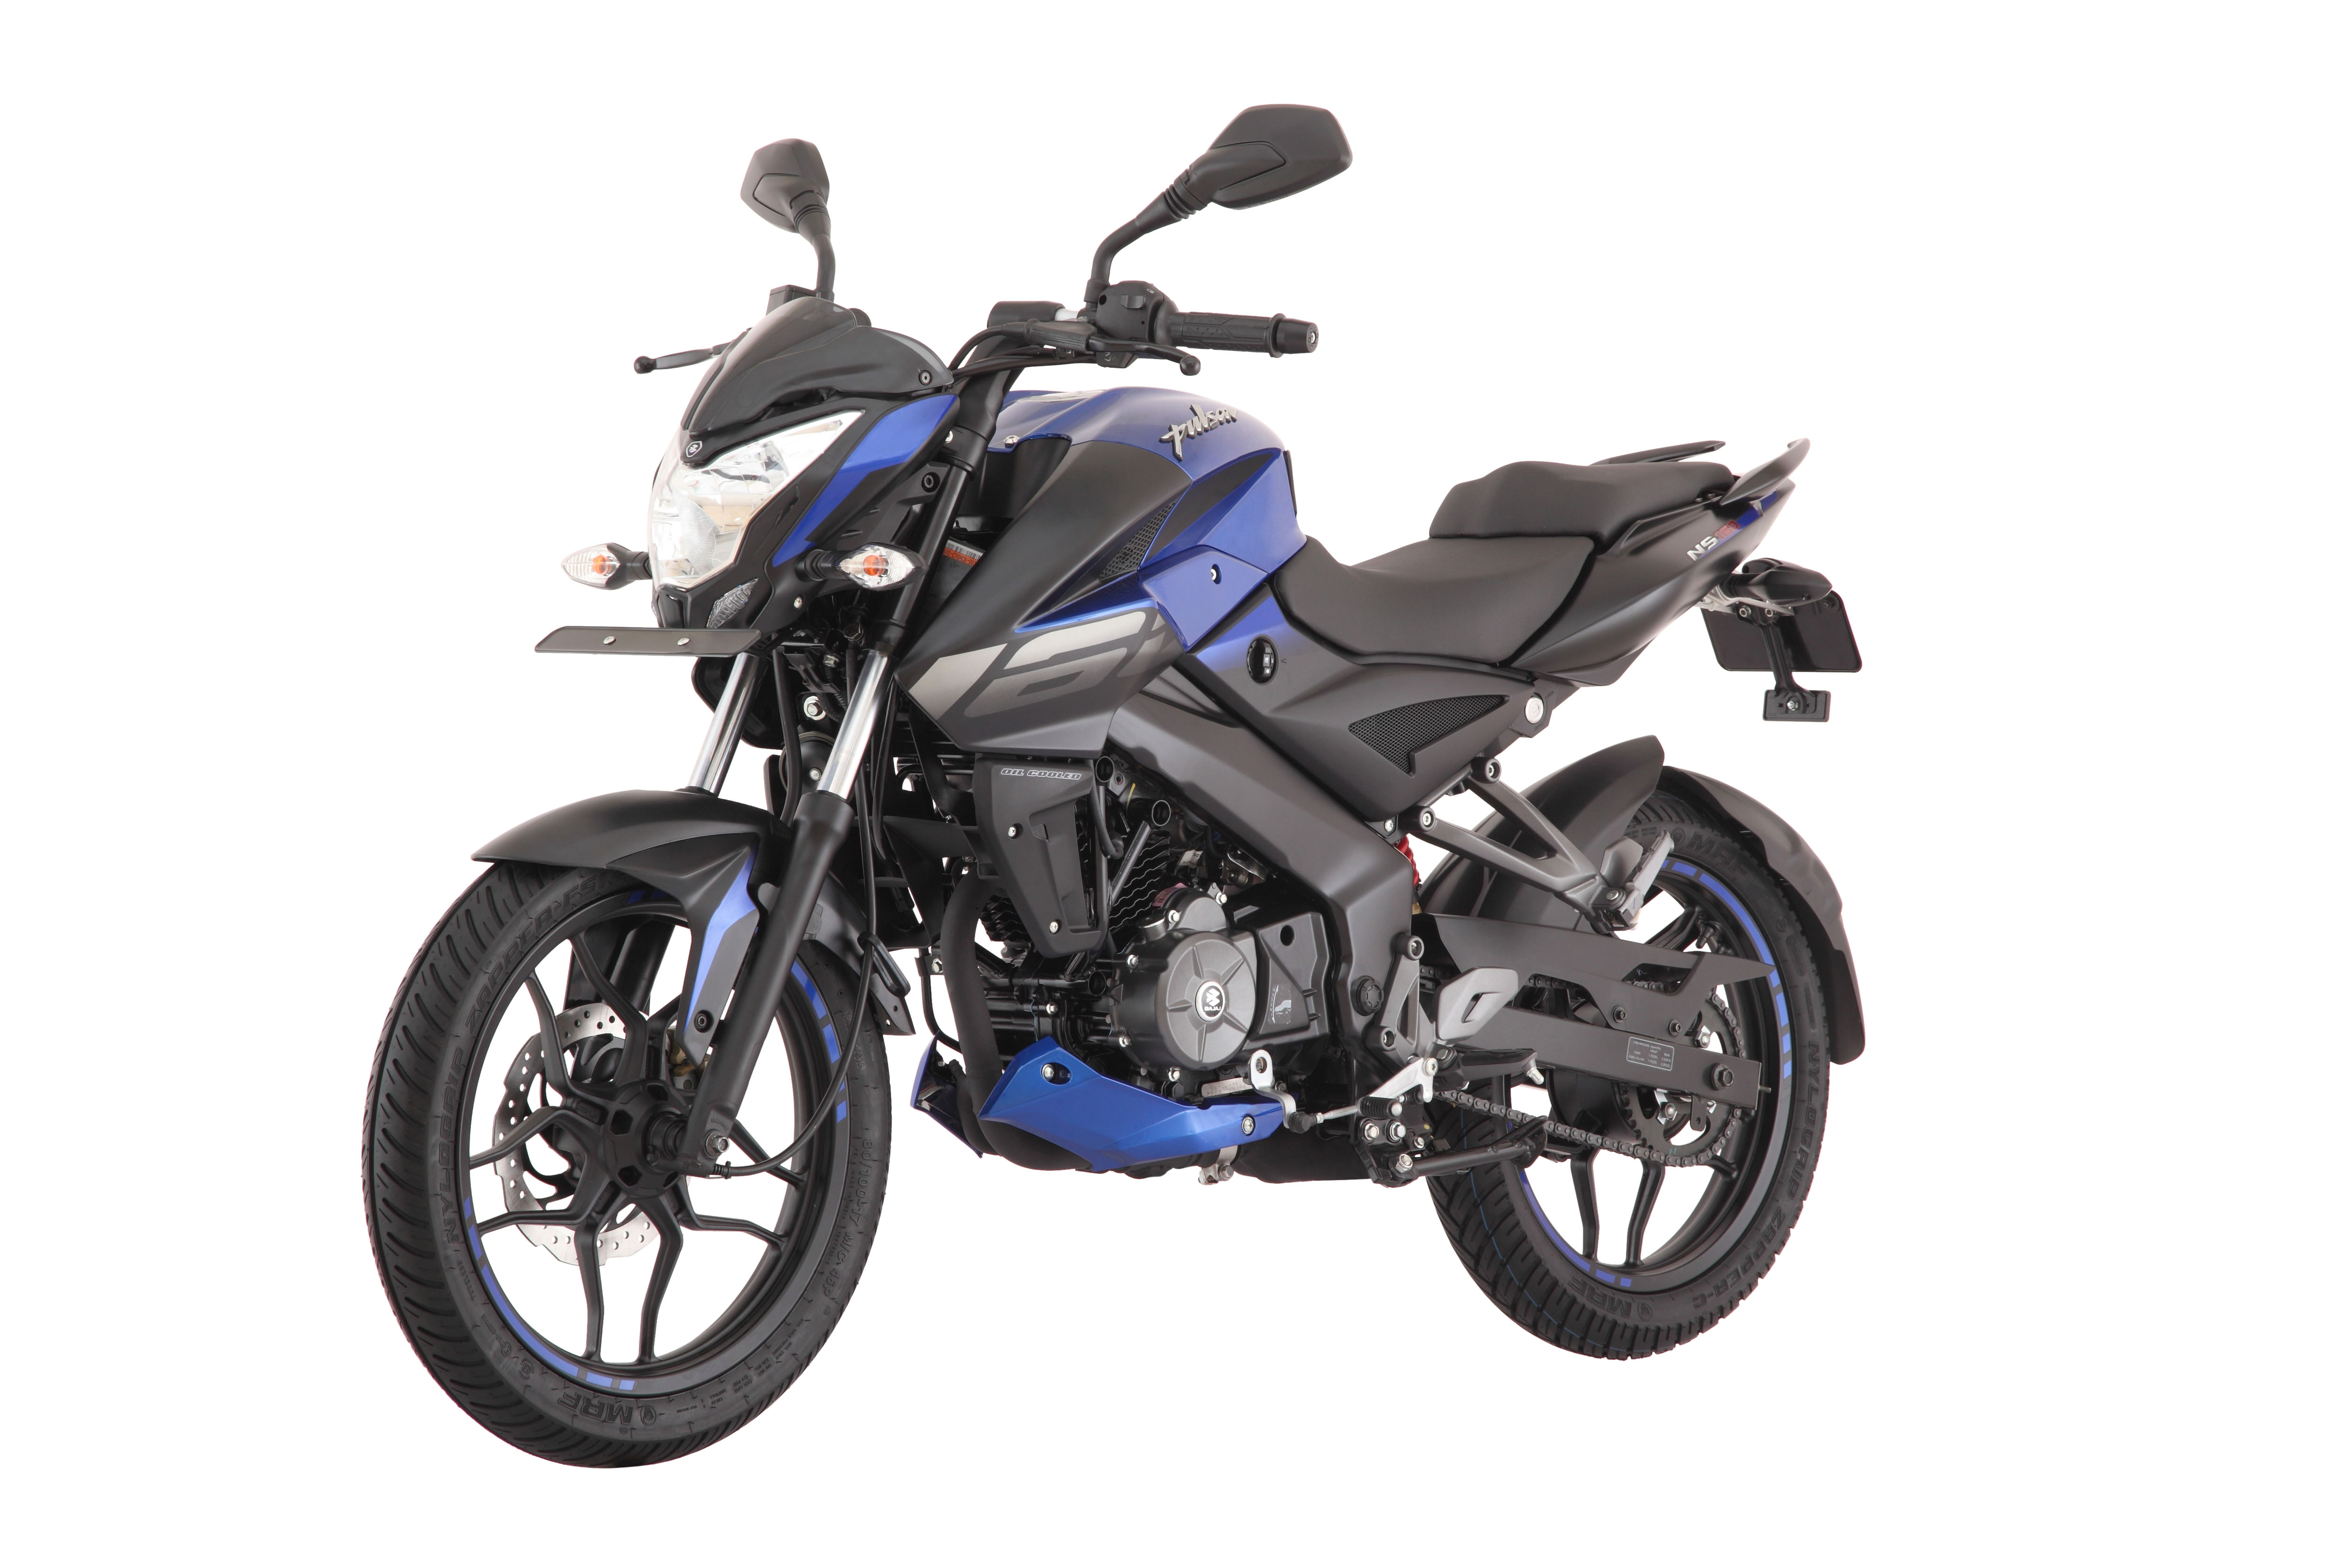 2021 Bajaj Pulsar 220F launched with an updated, more 